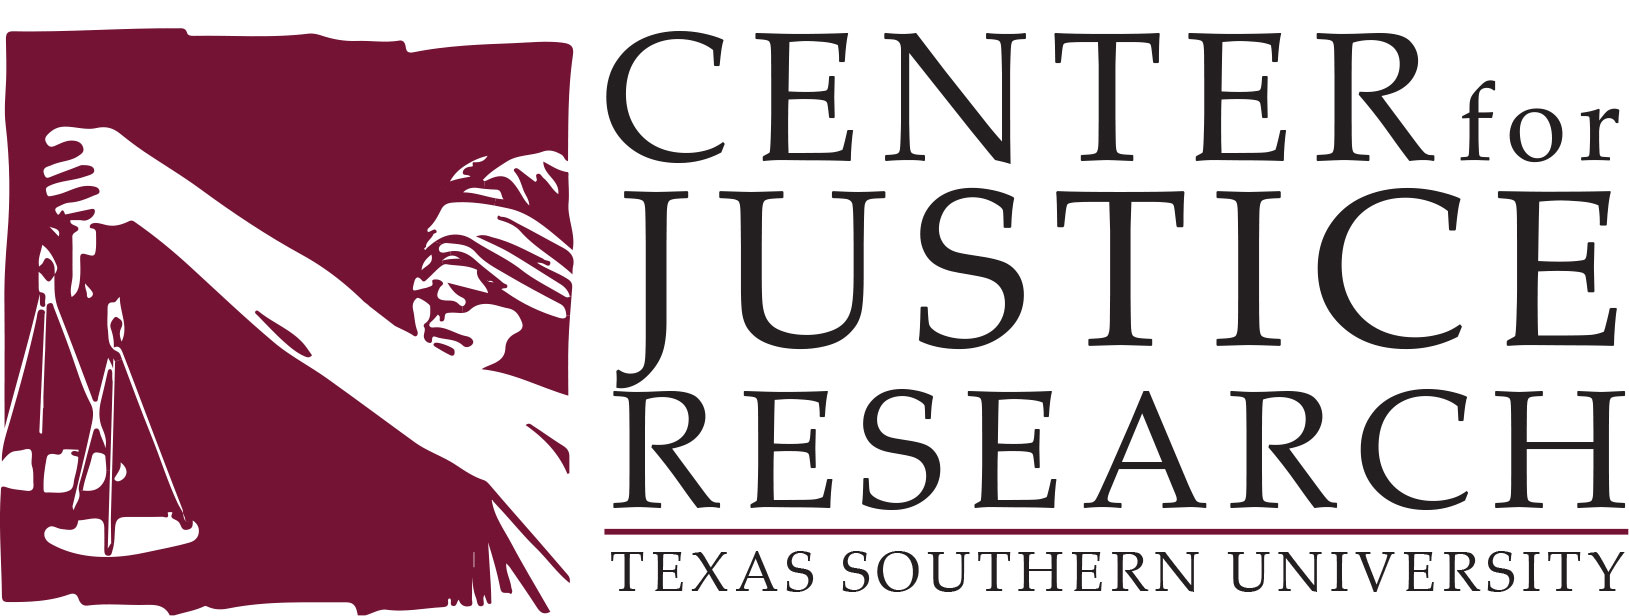 center for justice logo